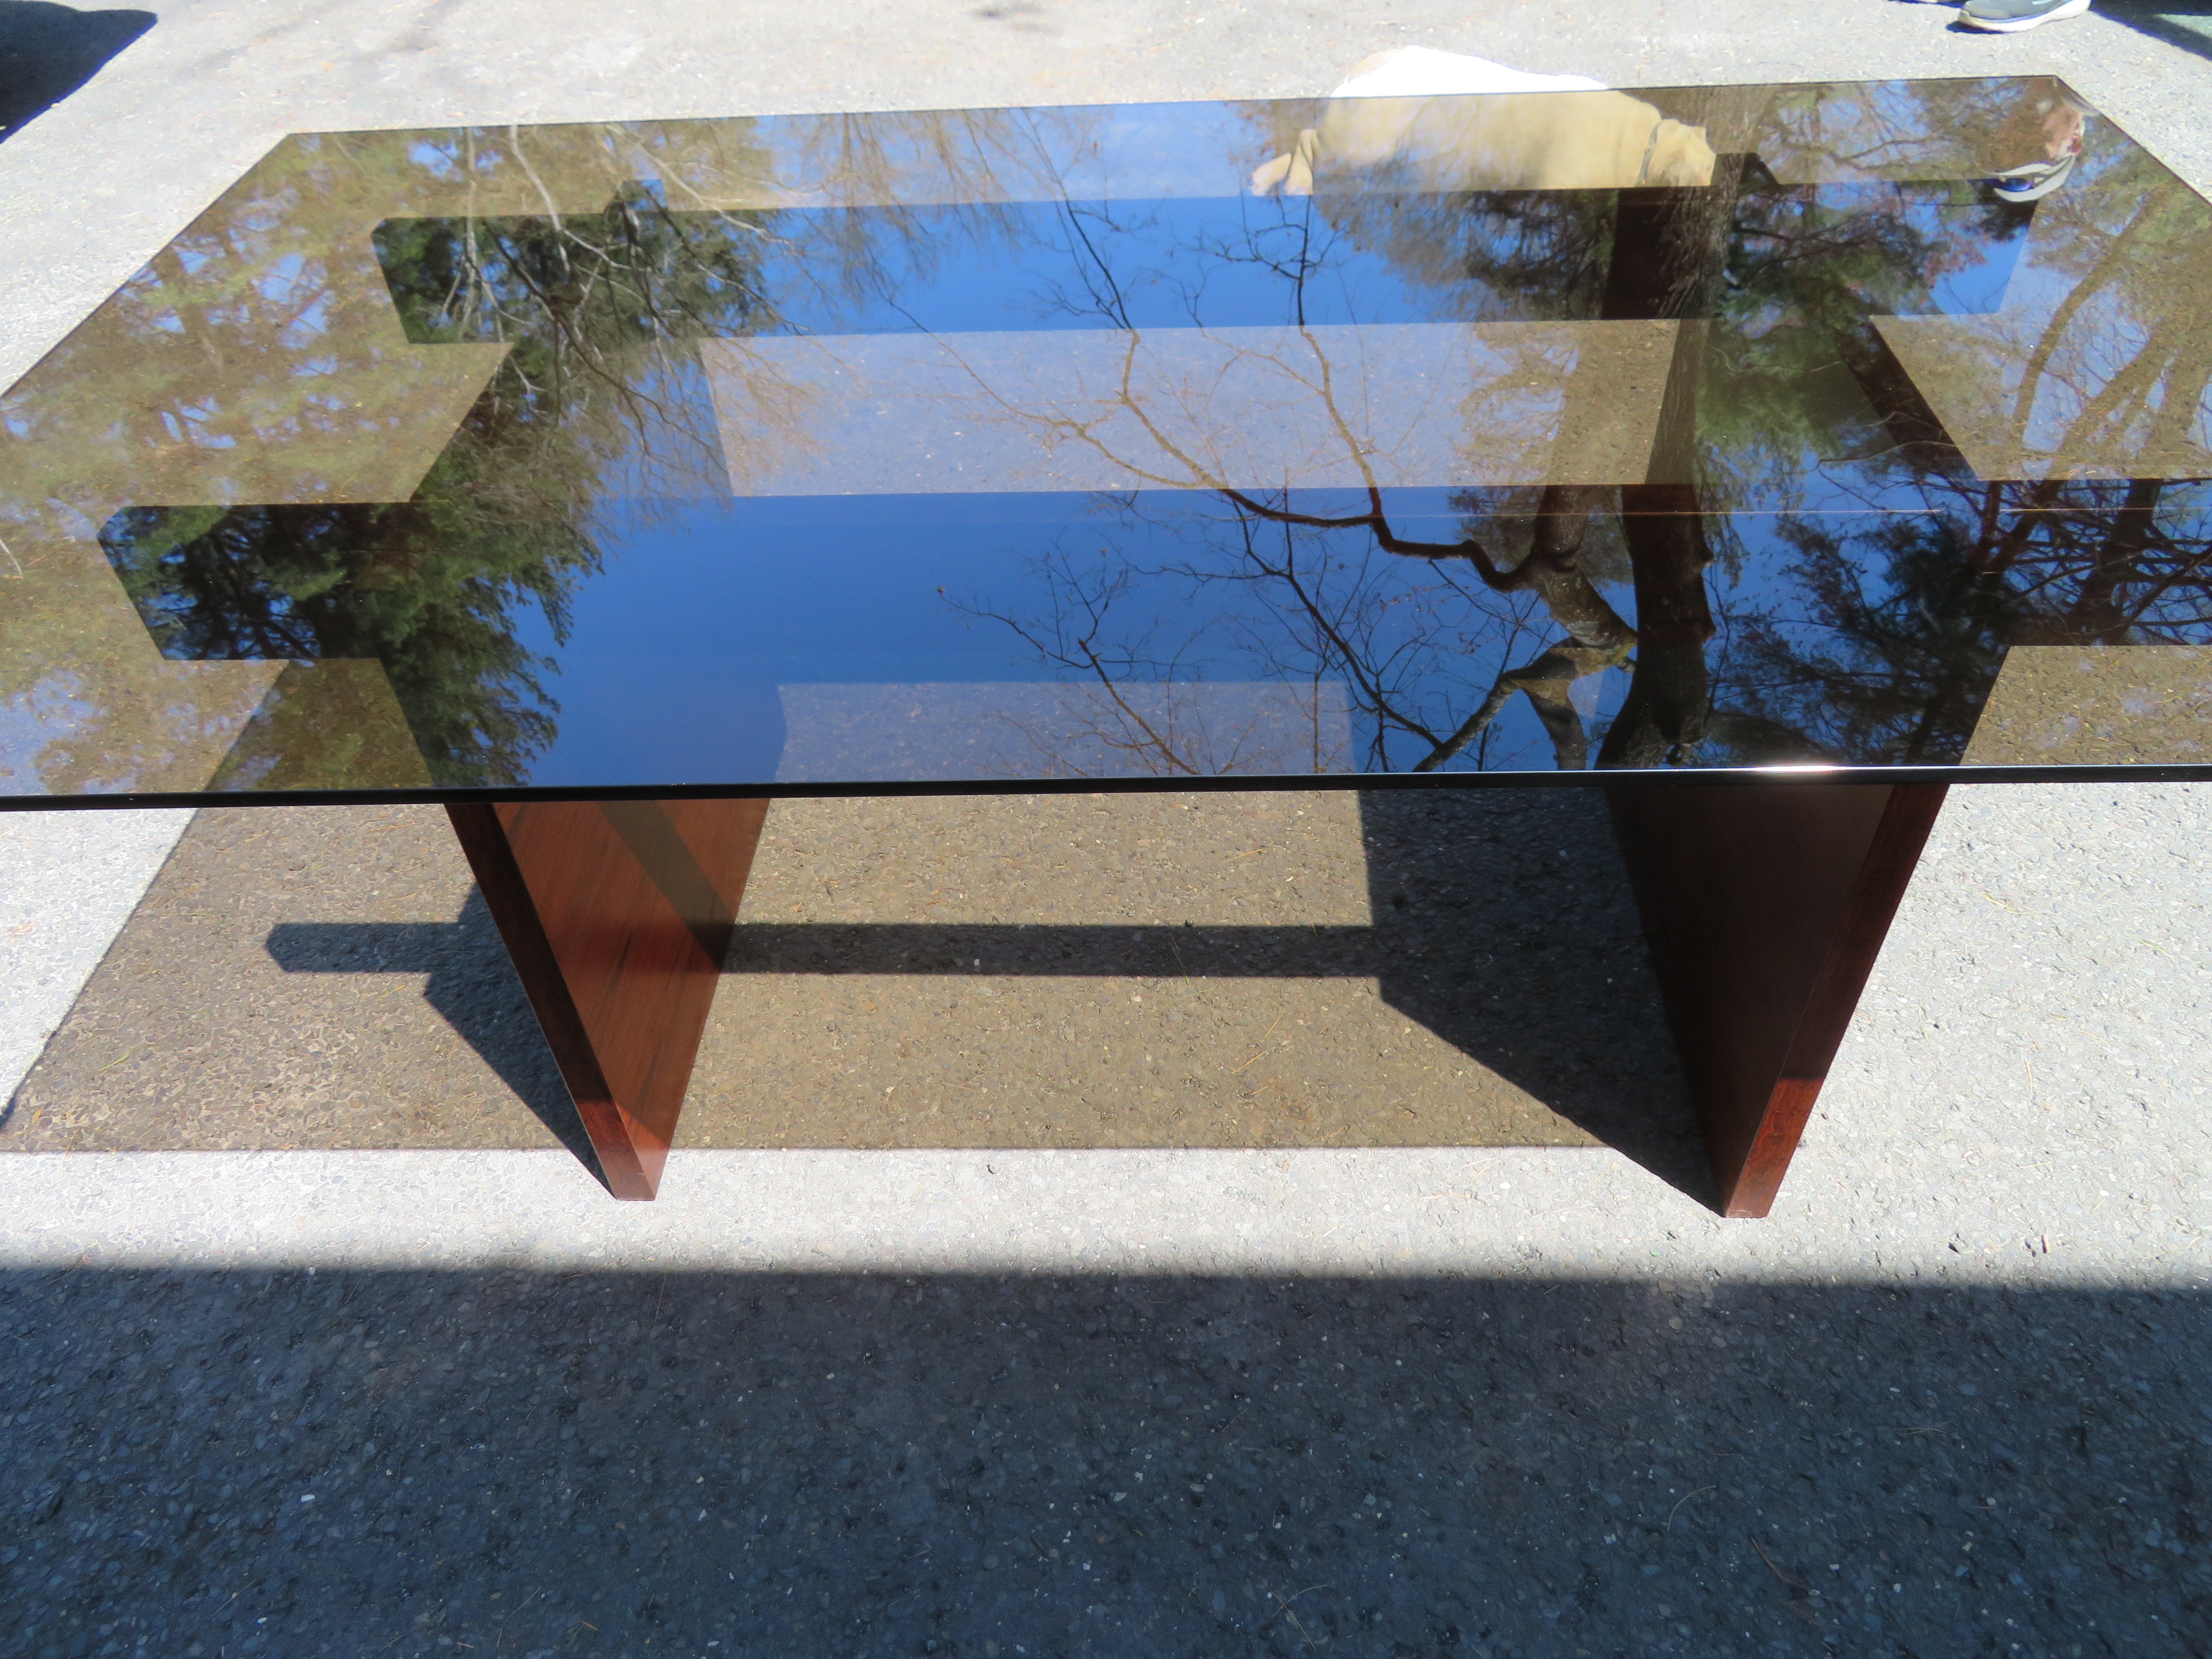 Fantastic Danish Modern dining table with smoked glass top by Poul Norreklit for Sigurid Hansen Mobelfabrik, Denmark, circa 1960's. Wonderful simple rosewood base with 1/2